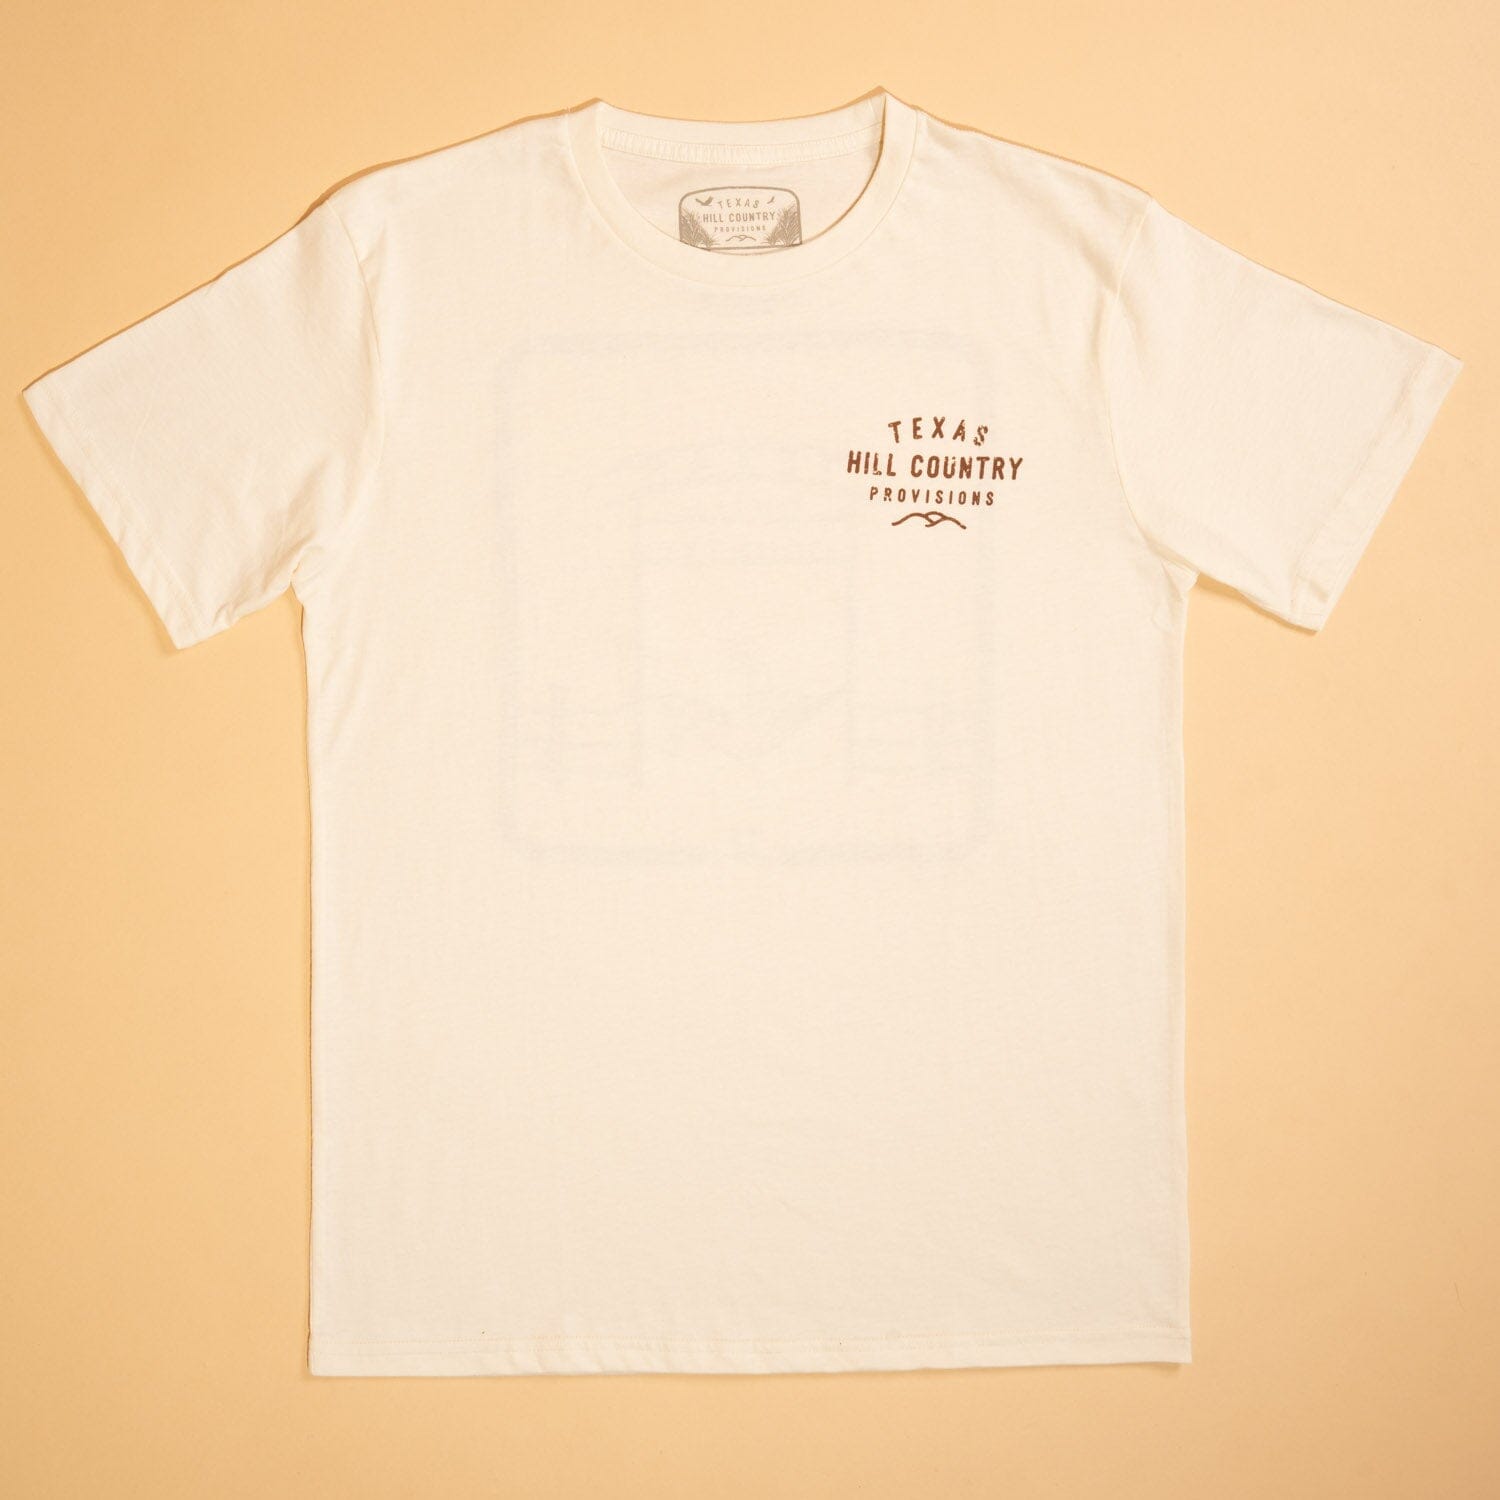 Chill Country Ranch Feather Grass Tee Texas Hill Country Provisions 